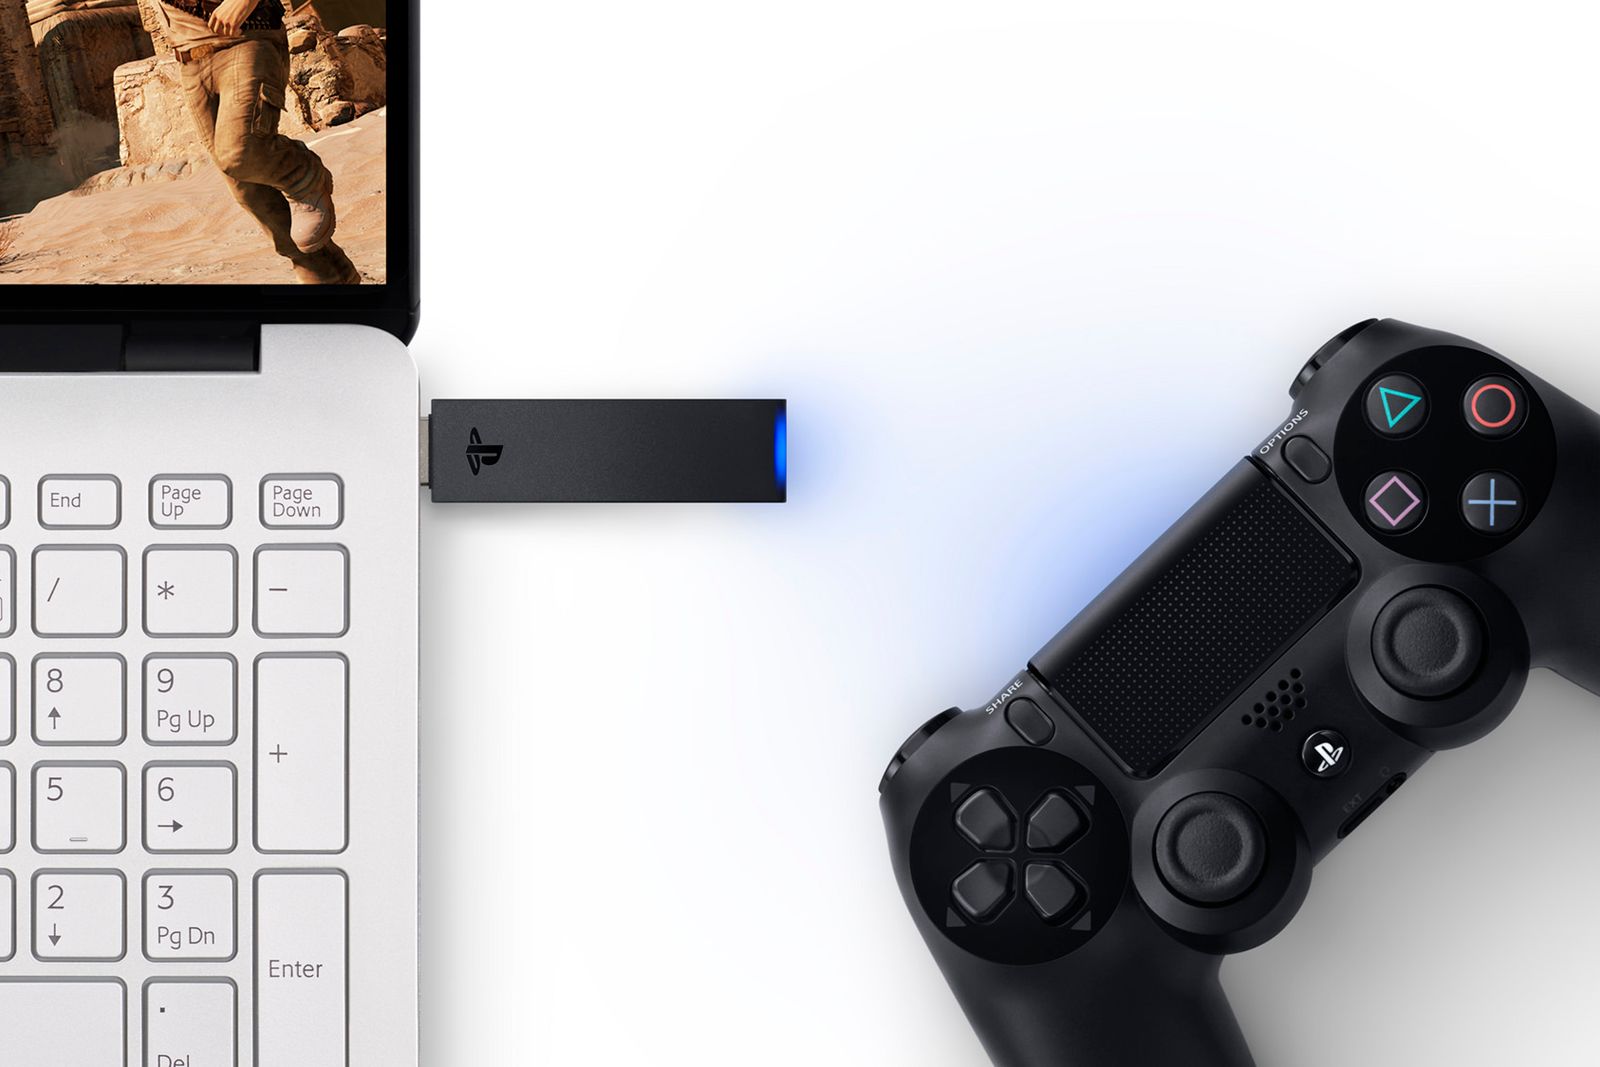 playstation now comes to windows pc with wireless dualshock adapter in support image 1